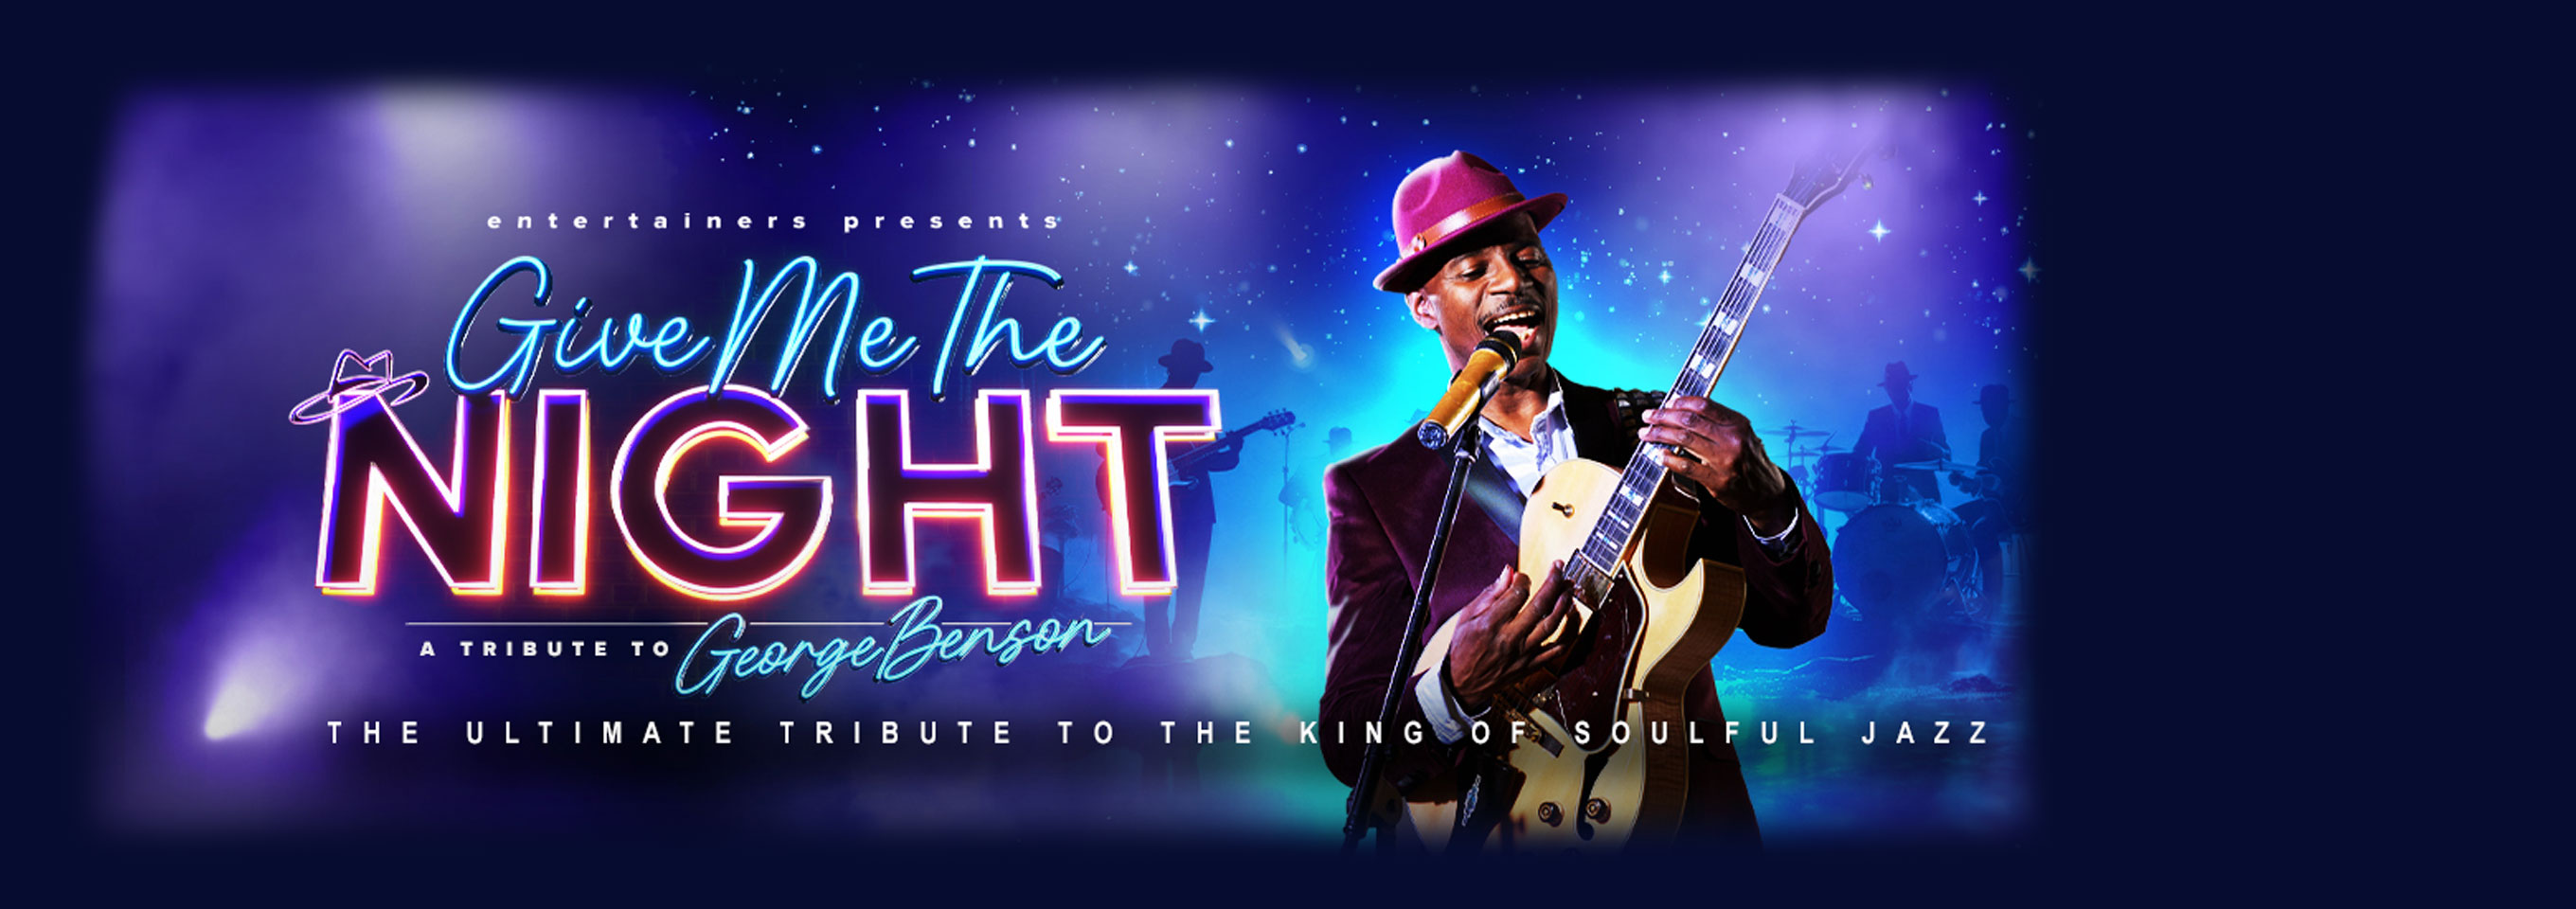 Give Me the Night: George Benson's Greatest Hits Live on Stage! hero image